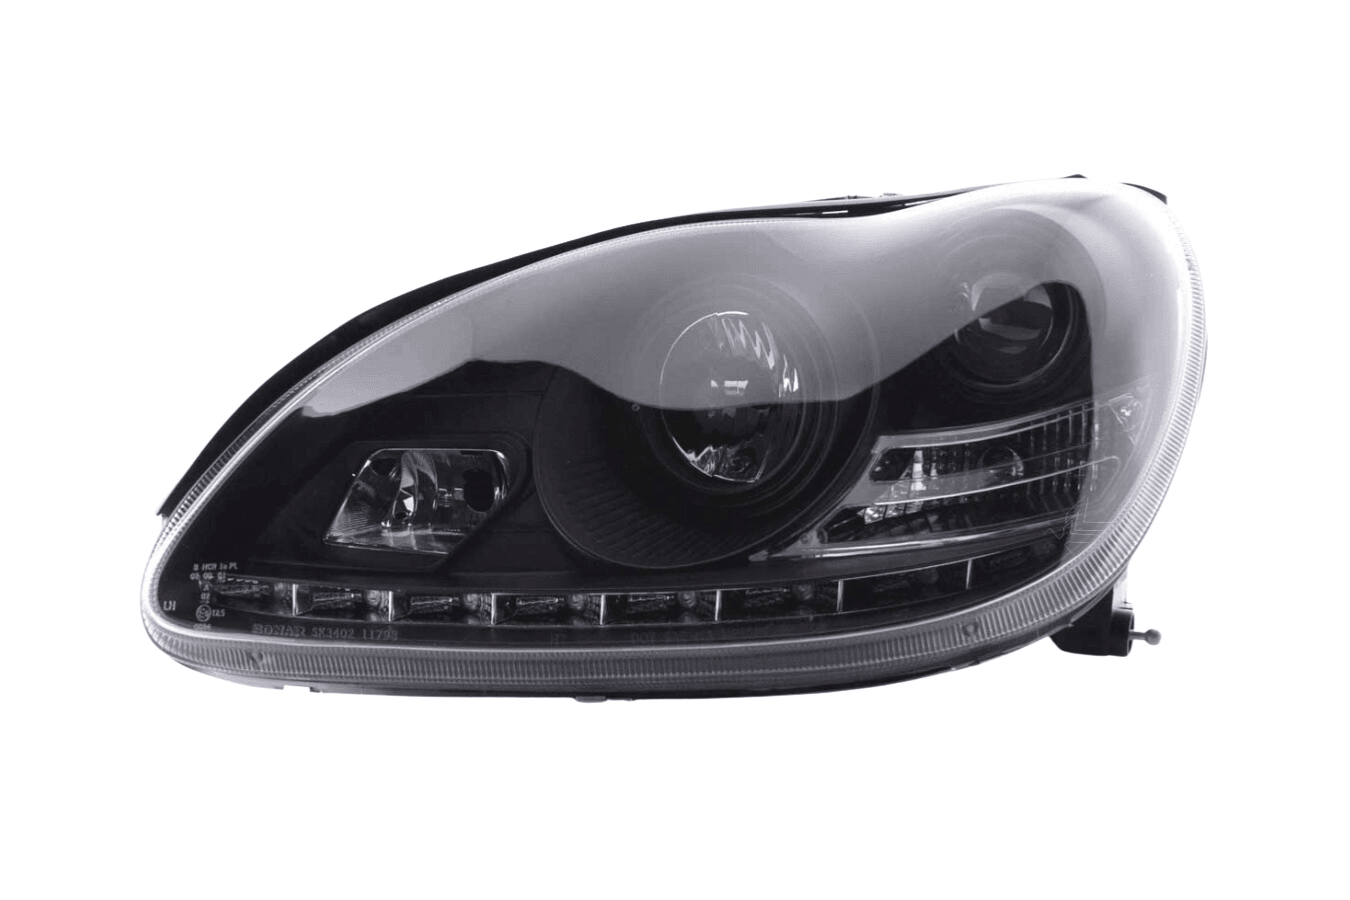 Mercedes Benz S-Class (220) Black LED Headlights with Daytime Running Lights (1998 - 2005) - K2 Industries